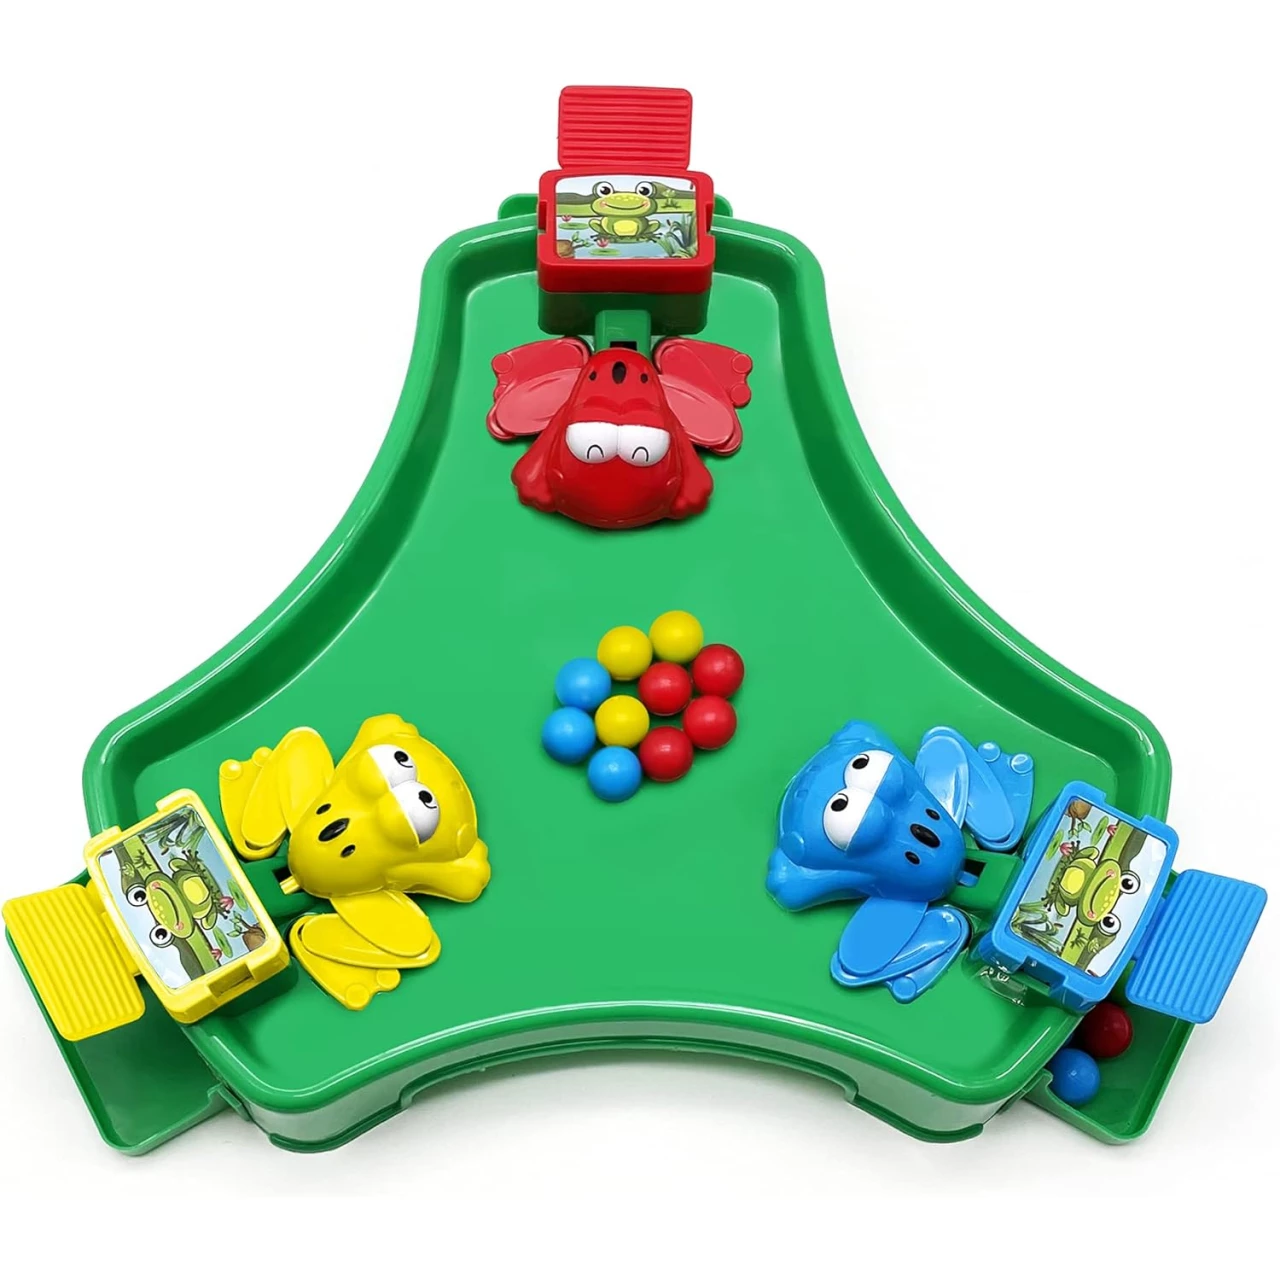 Hungry Frogs Board Game – Intense Game of Quick Reflexes – Pre-School Game for Ages 3 and Up; for 2 to 3 Players